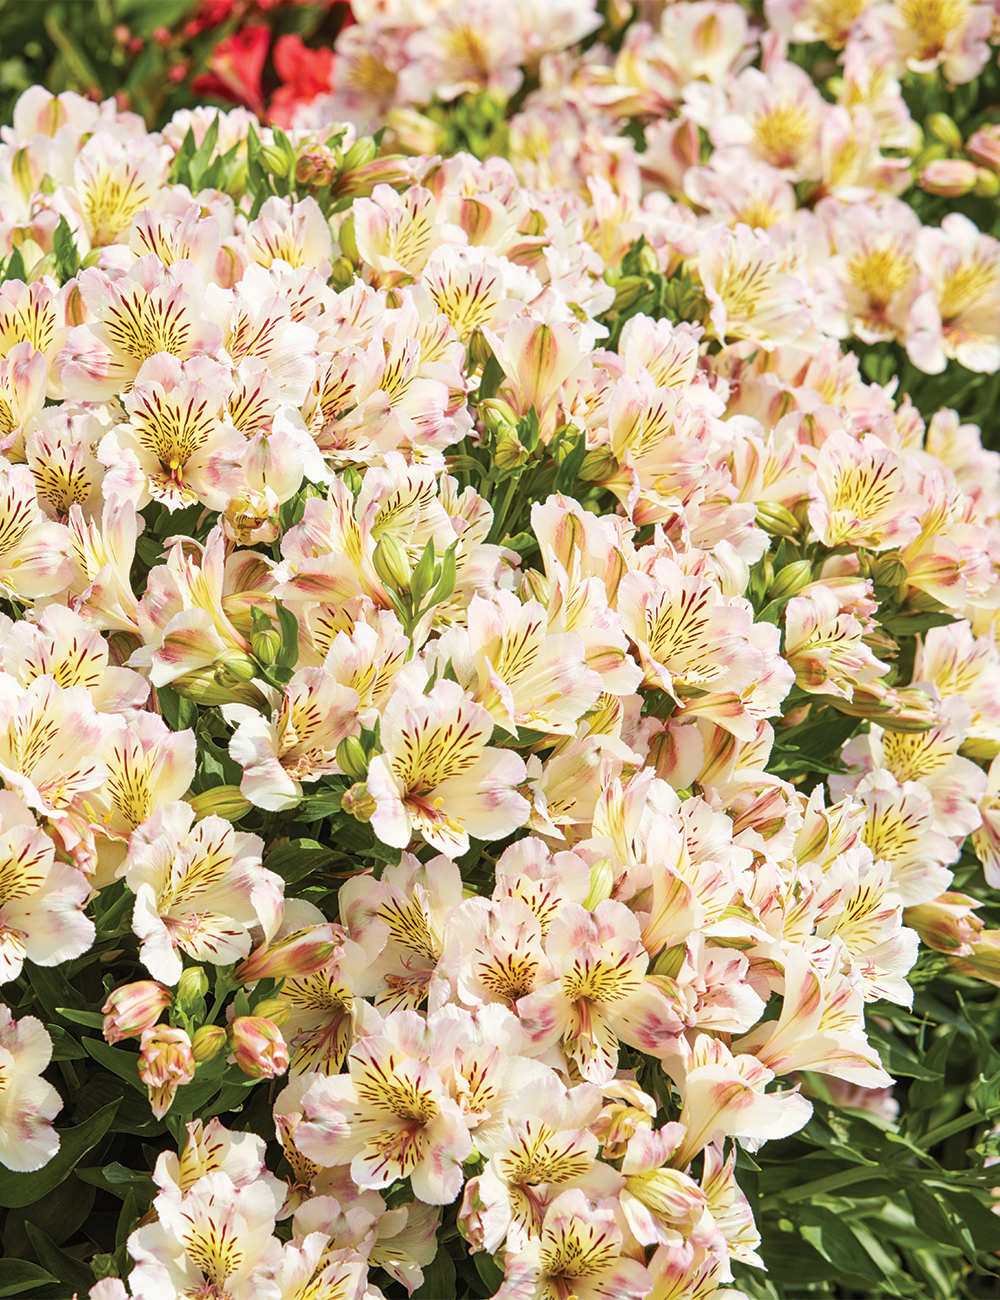 Peruvian Lily 'Time Valley'